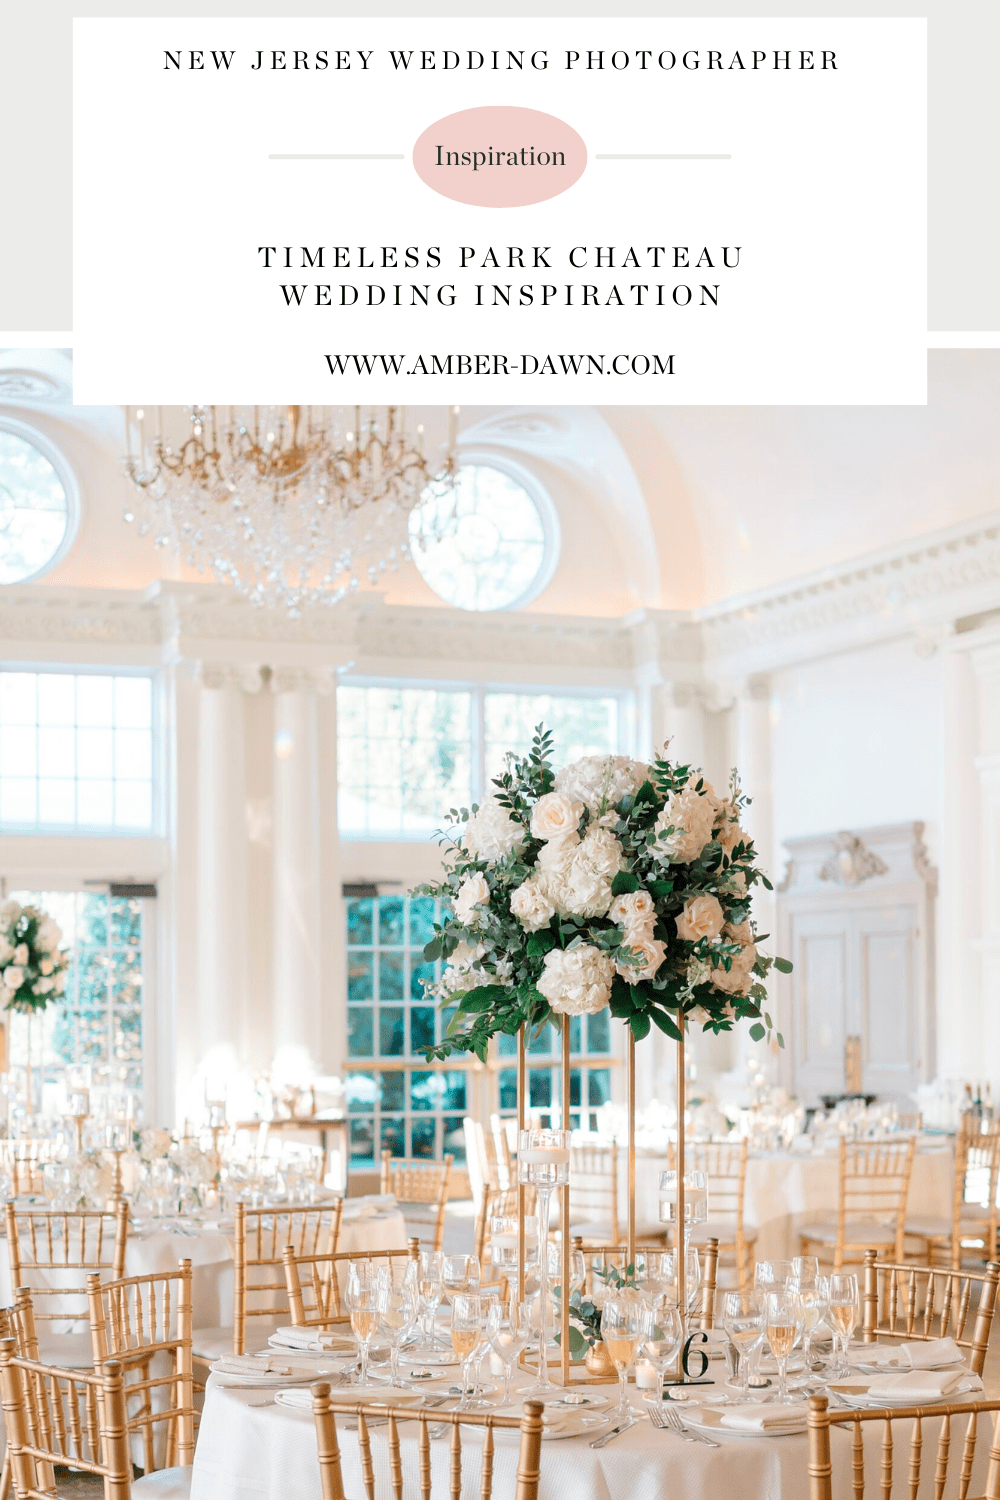 Timeless Park Chateau Wedding in East Brunswick, NJ photographed by New Jersey Wedding Photographer, Amber Dawn Photography